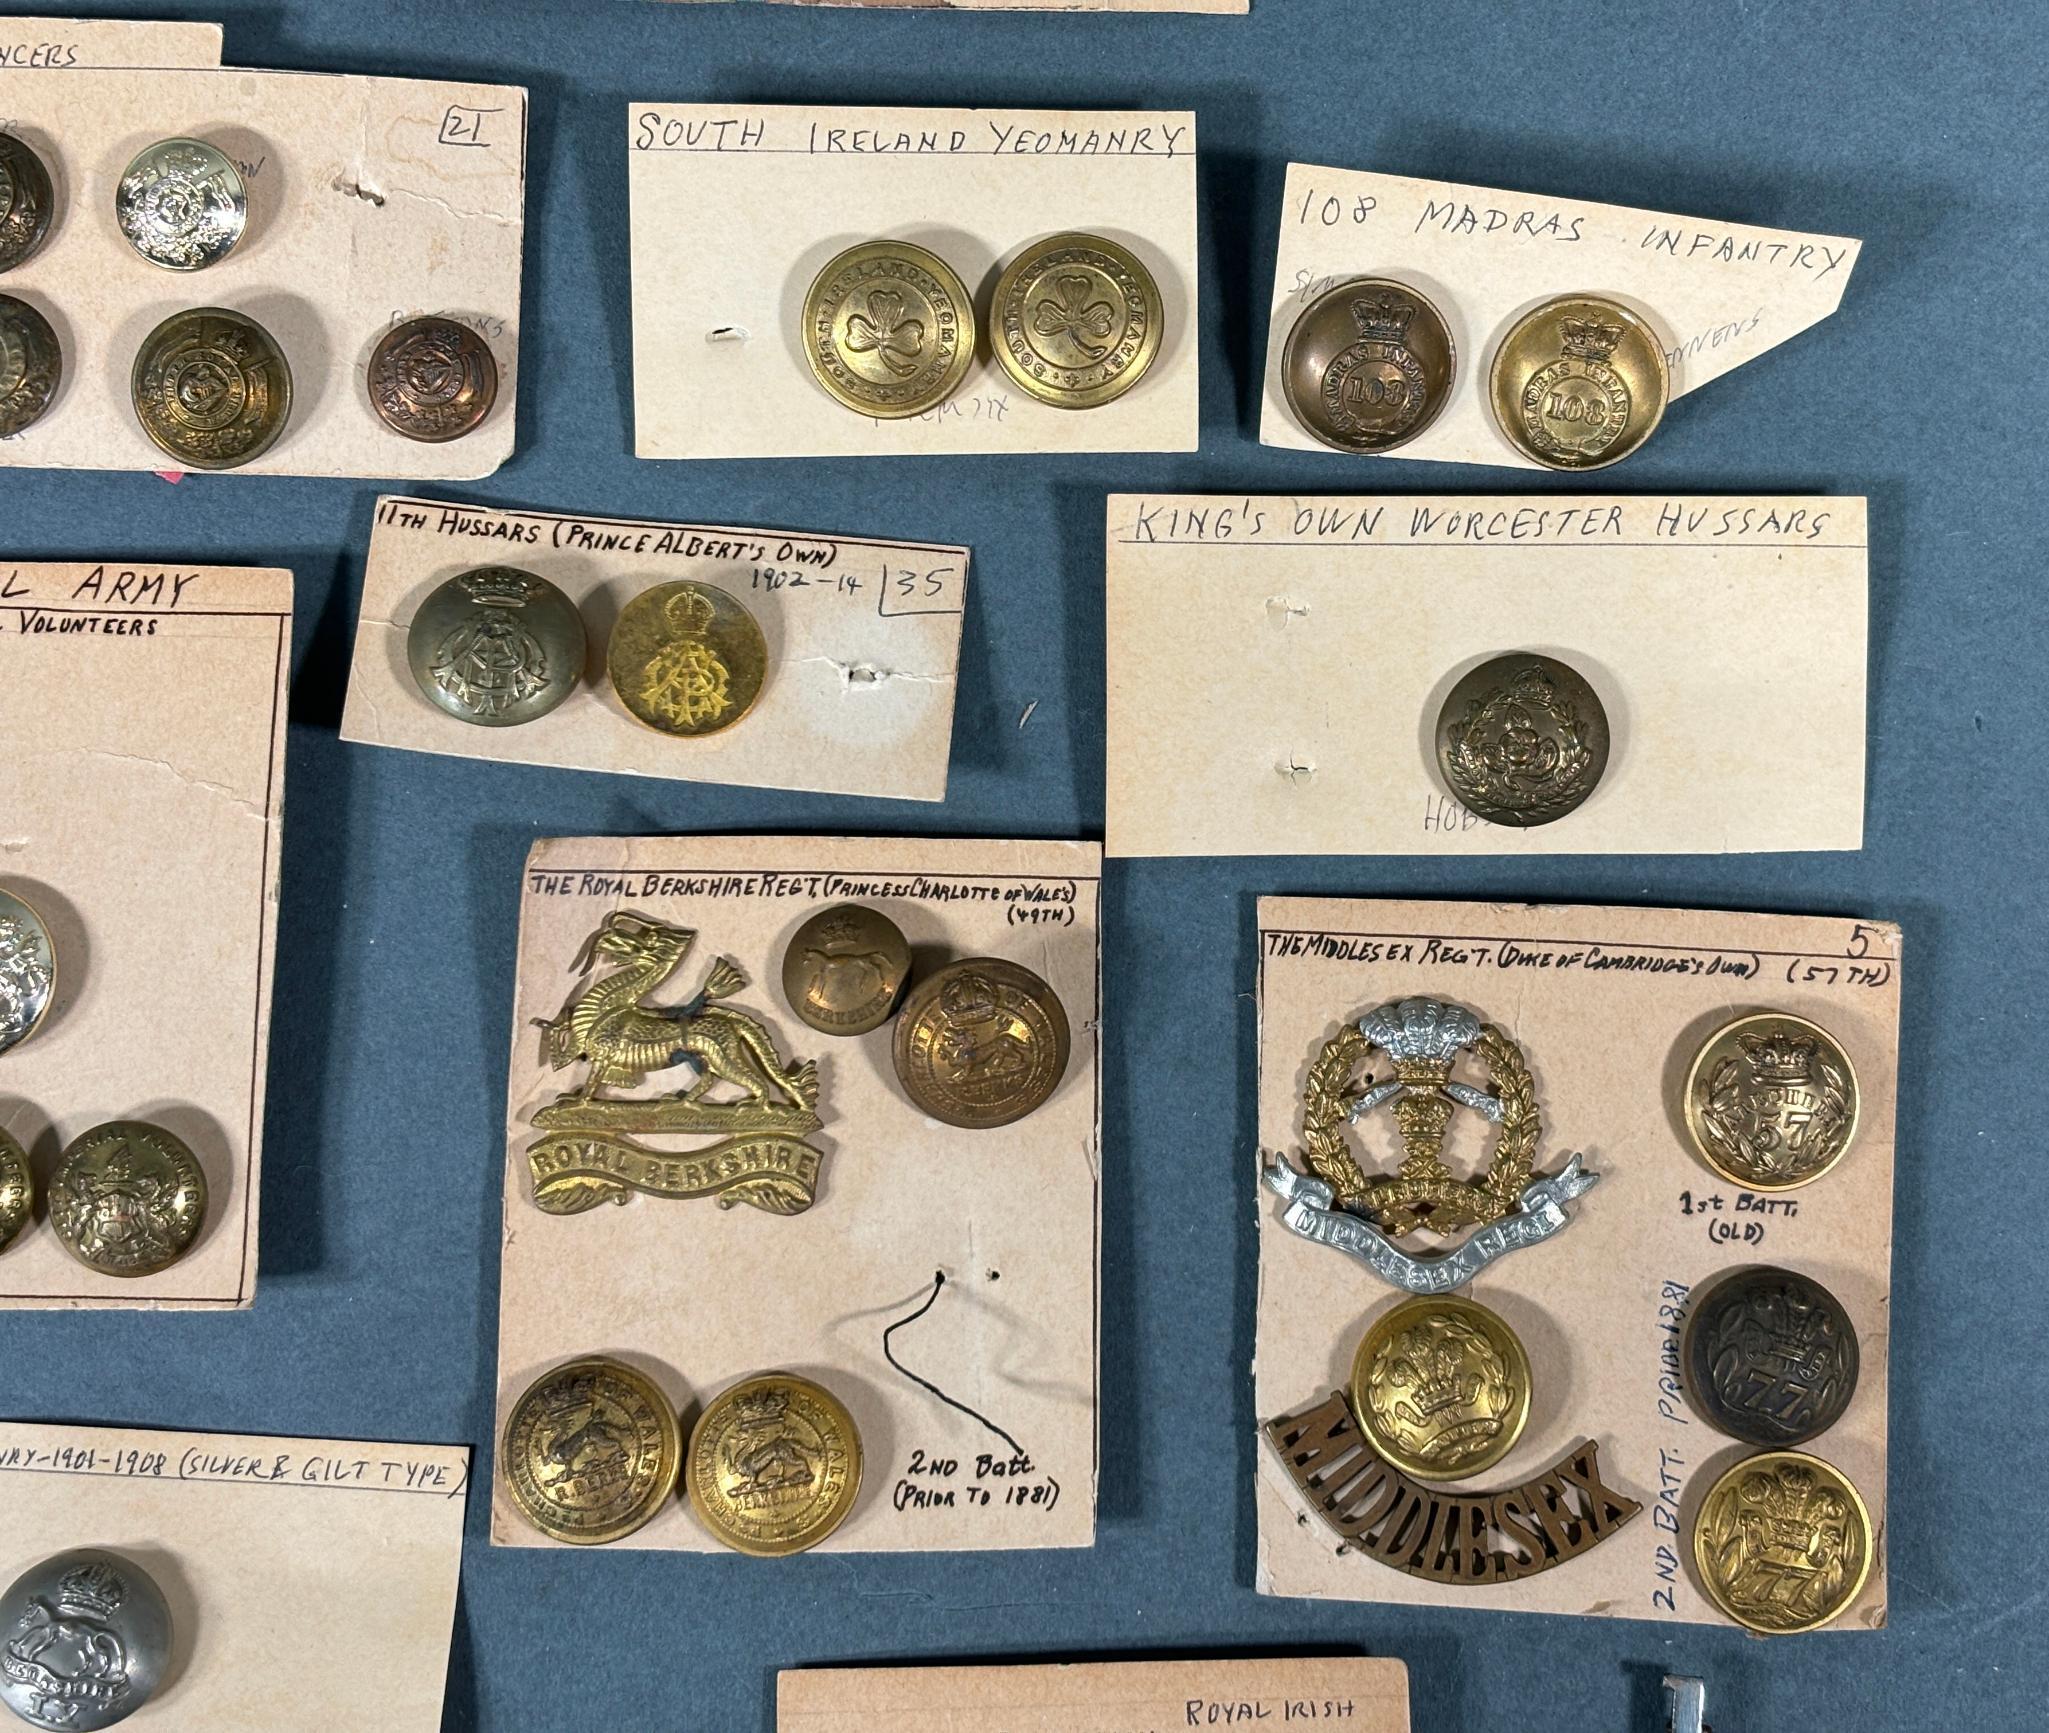 VINTAGE BRITISH MILITARY BUTTON AND BADGE LOT